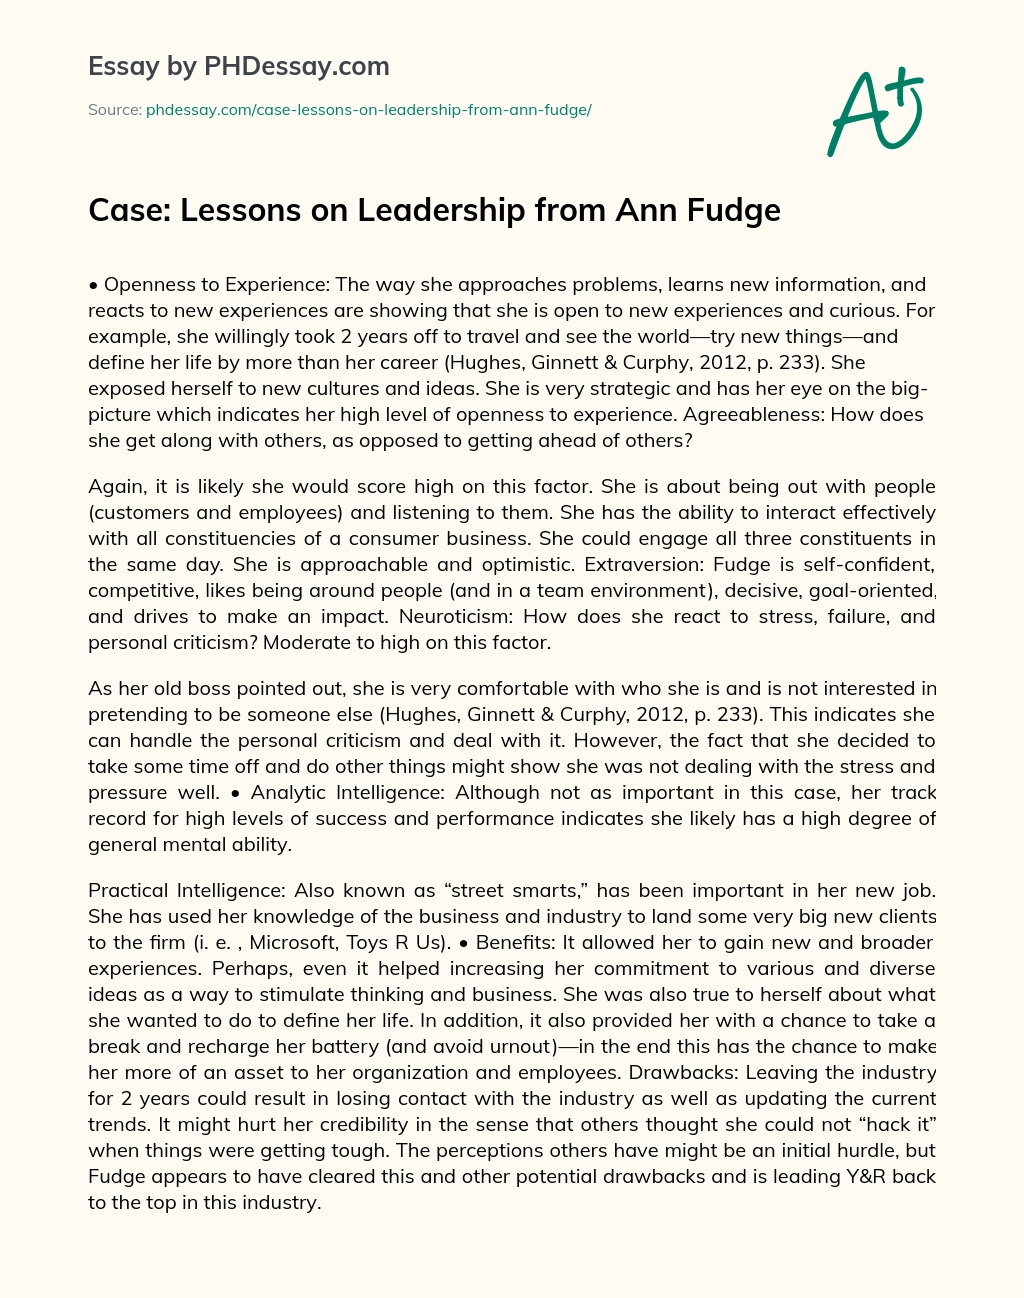 Case: Lessons on Leadership from Ann Fudge essay